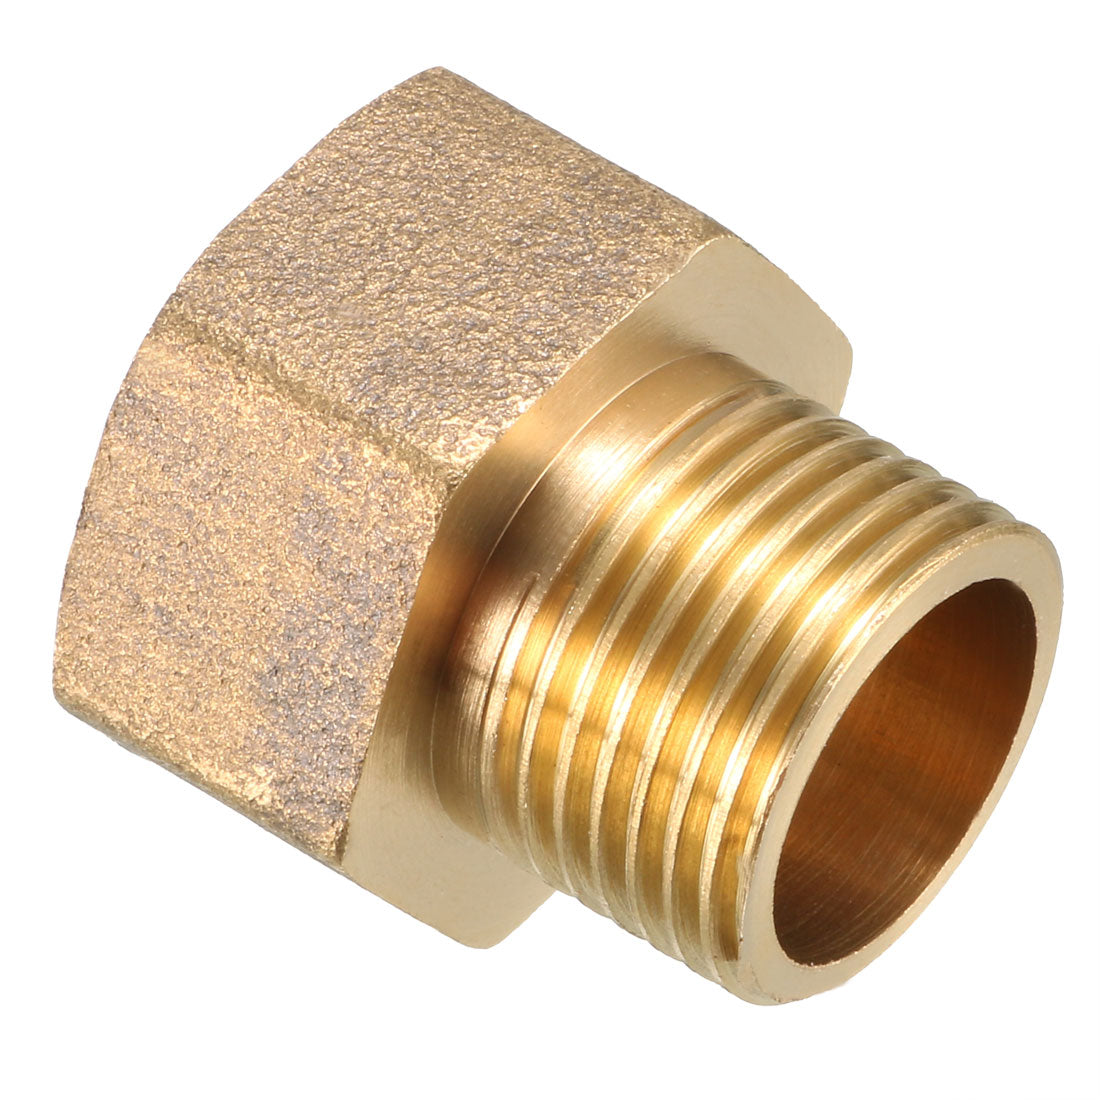 uxcell Uxcell Brass Threaded Pipe Fitting G3/8 Male x G1/2 Female Coupling 3pcs